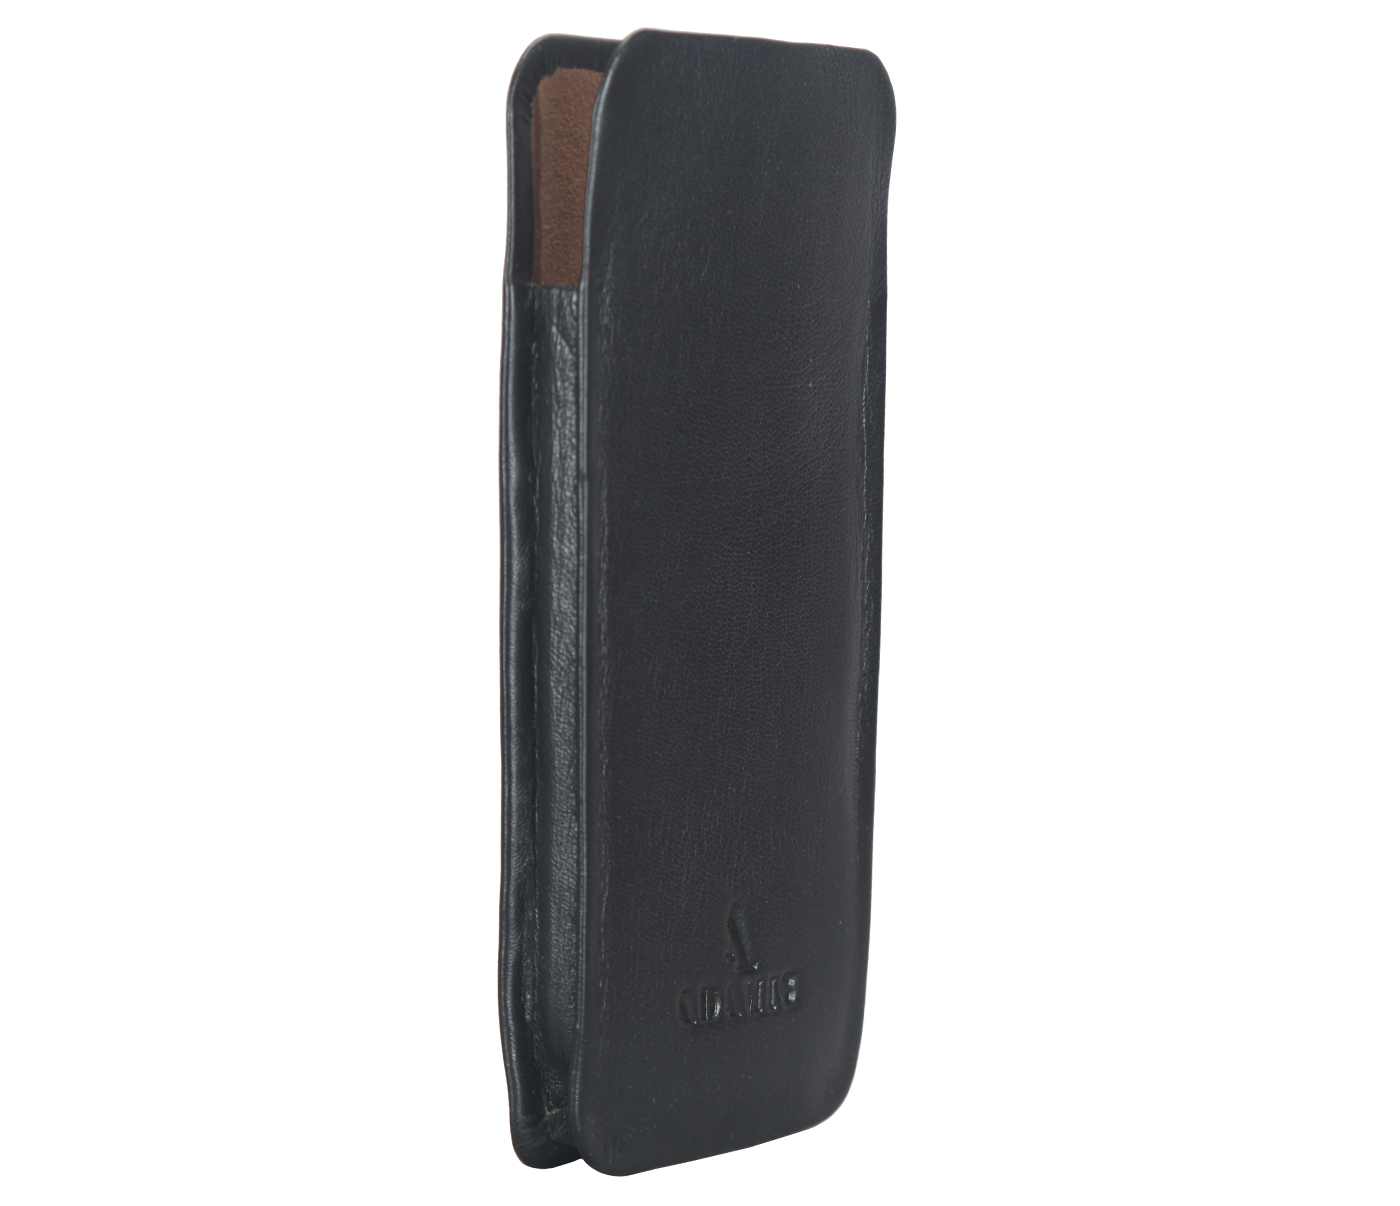 Spectacle Case--Soft stitch free spectacle case in Genuine Leather - Black